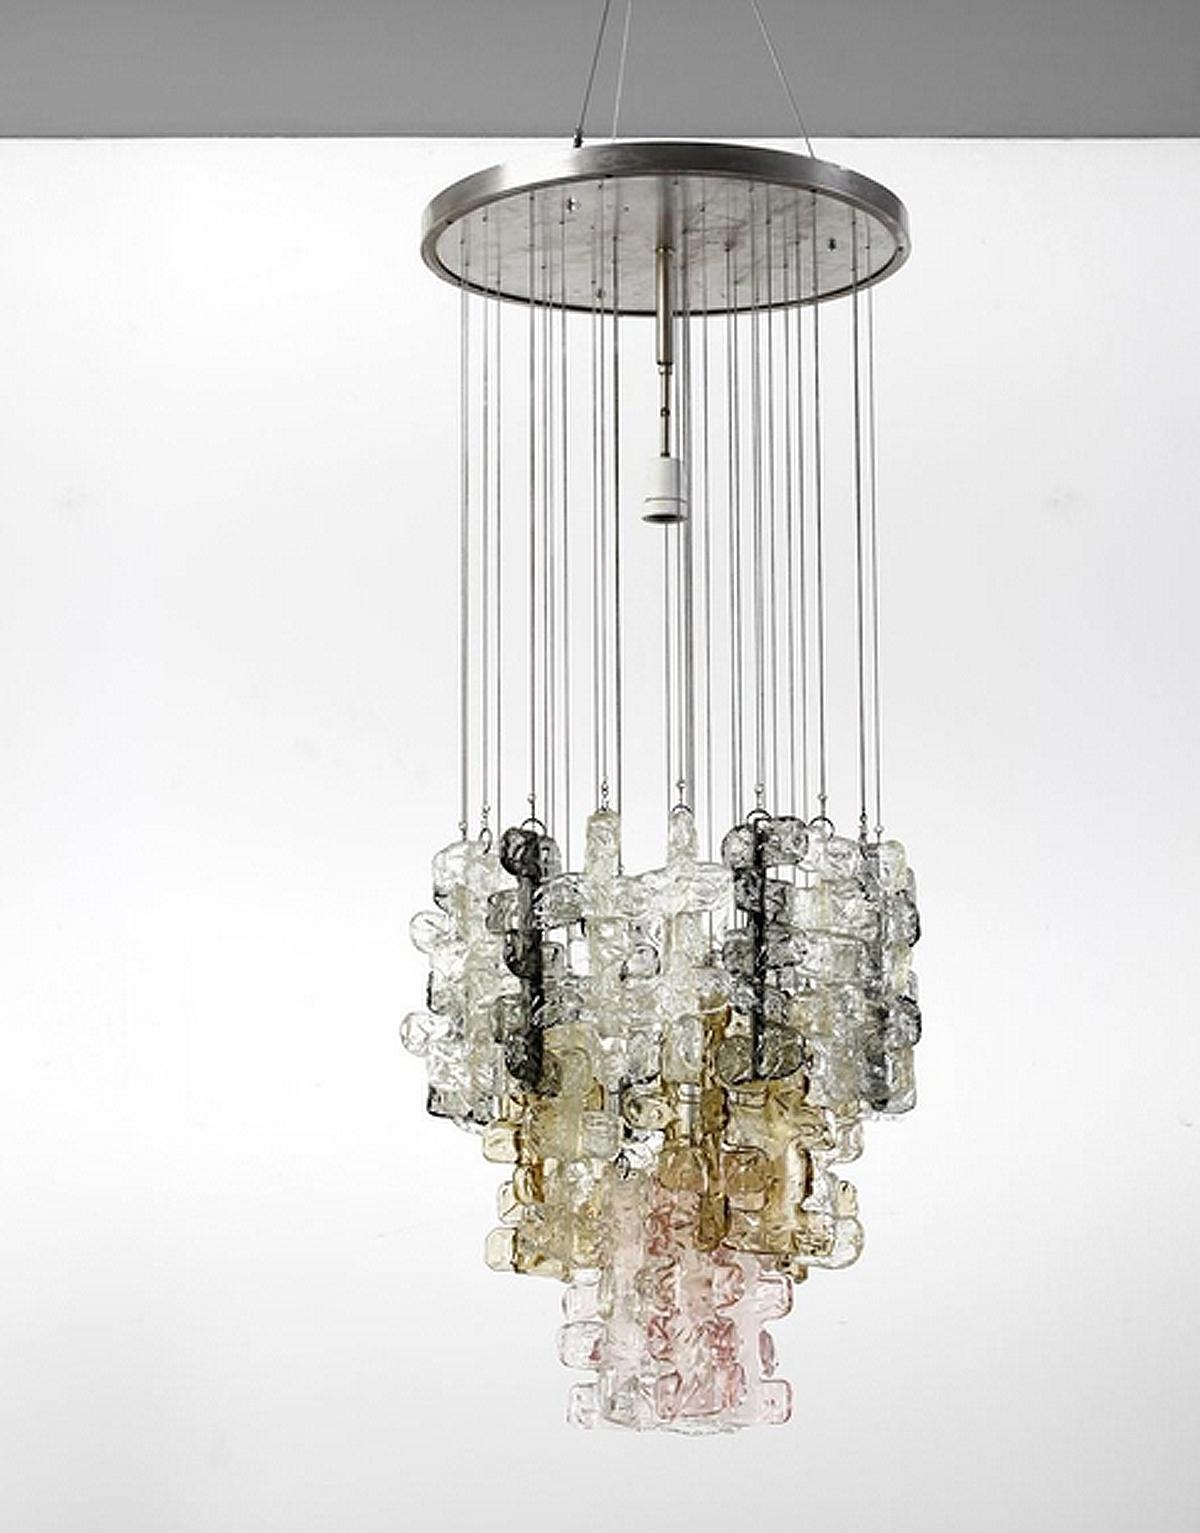 Rare chandelier with 32 pieces of curly transparent Murano hand-crafted ice glasses hanging from a chromed ceiling plate down on chromed chains of different lengths. All glasses are in mint condition, with no repairs or chips. Every single glass